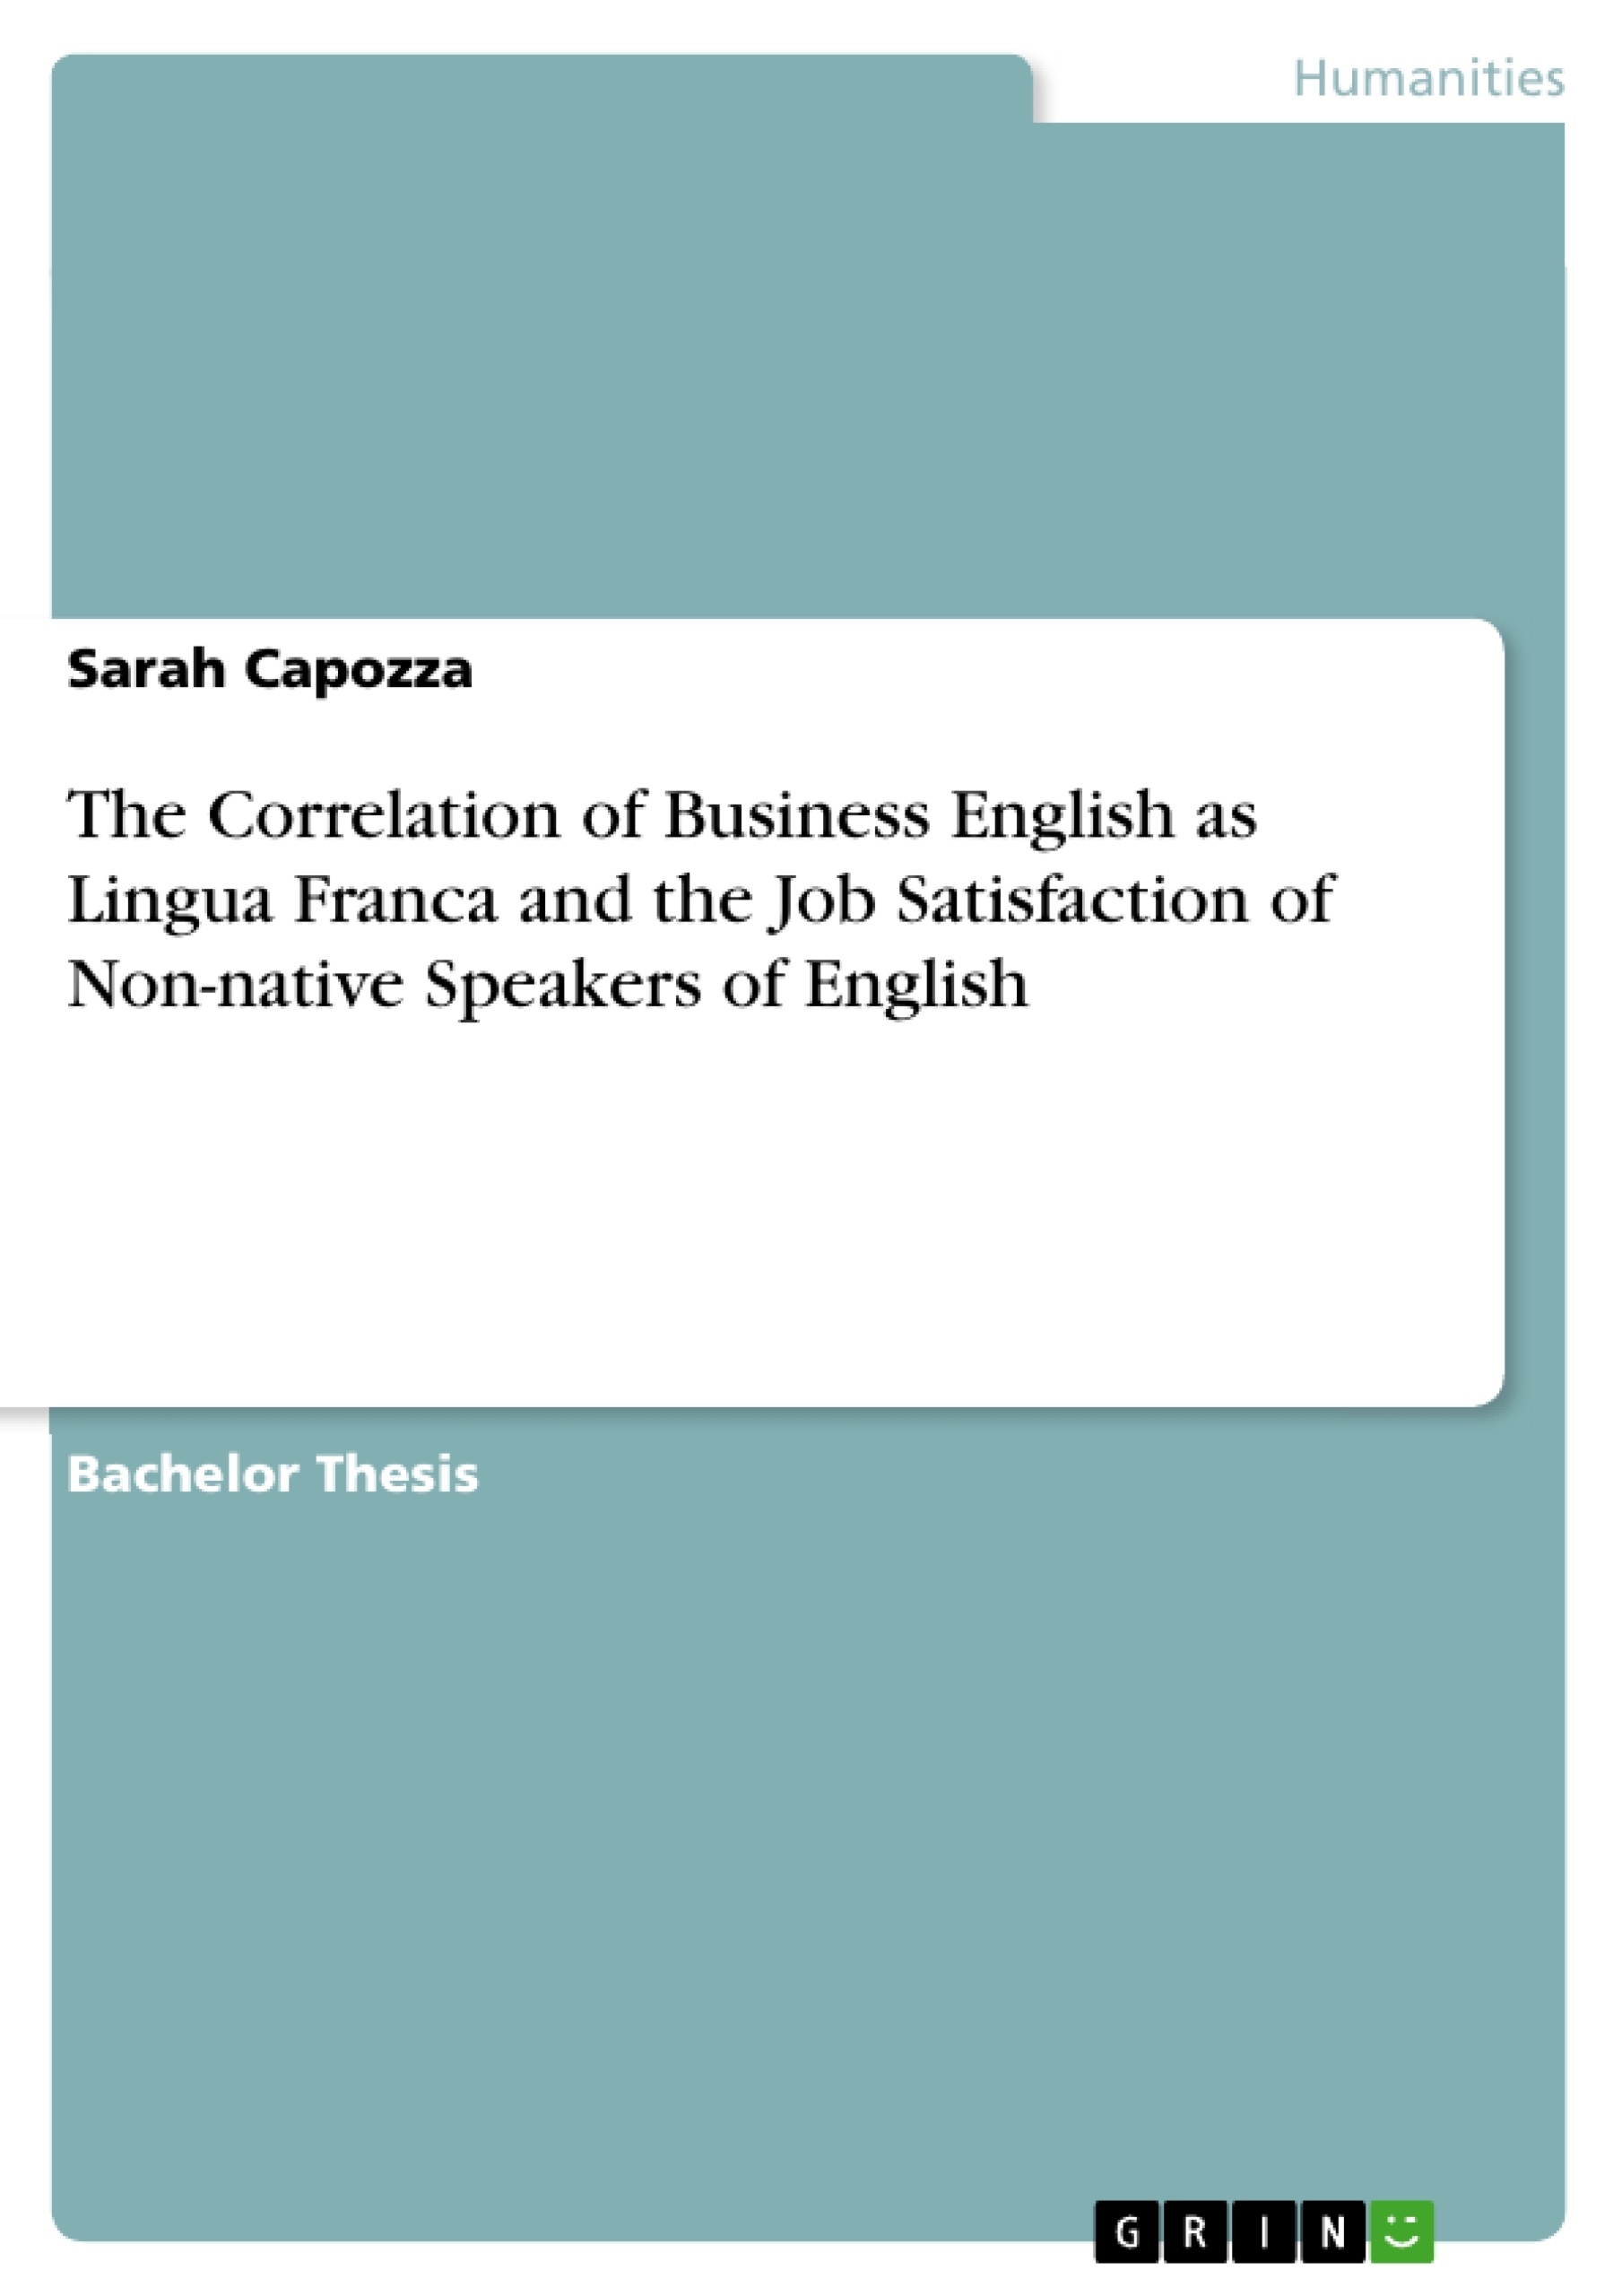 Título: The Correlation of Business English as Lingua Franca and the Job Satisfaction of Non-native Speakers of English